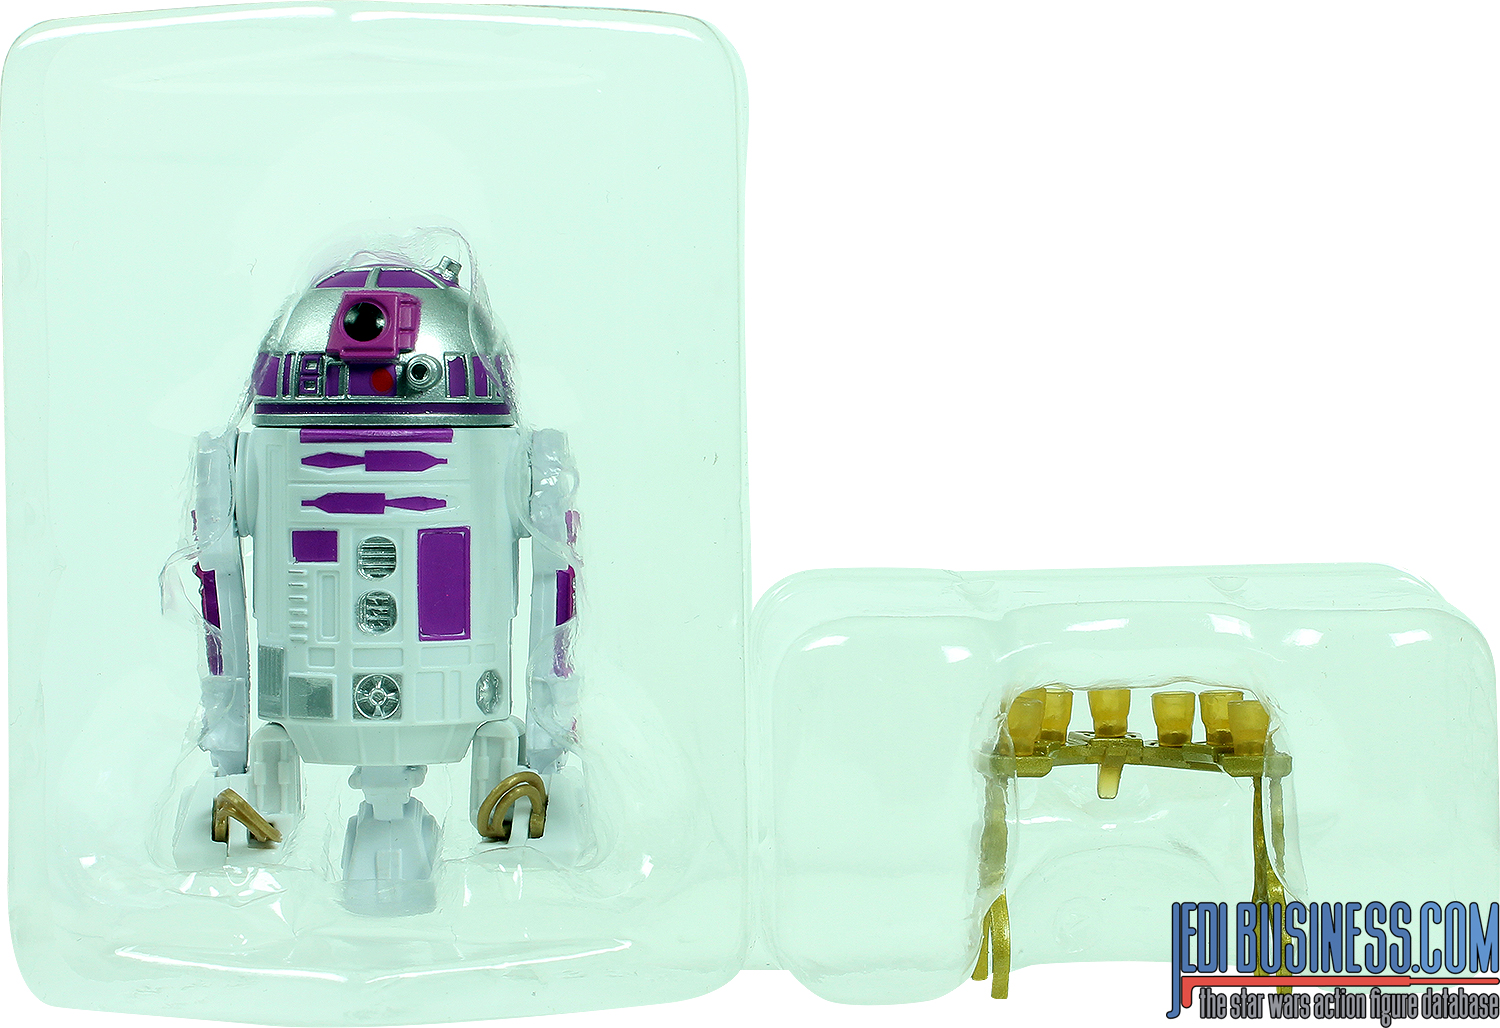 Astromech Droid Galaxy's Edge Droid #2 out of 9